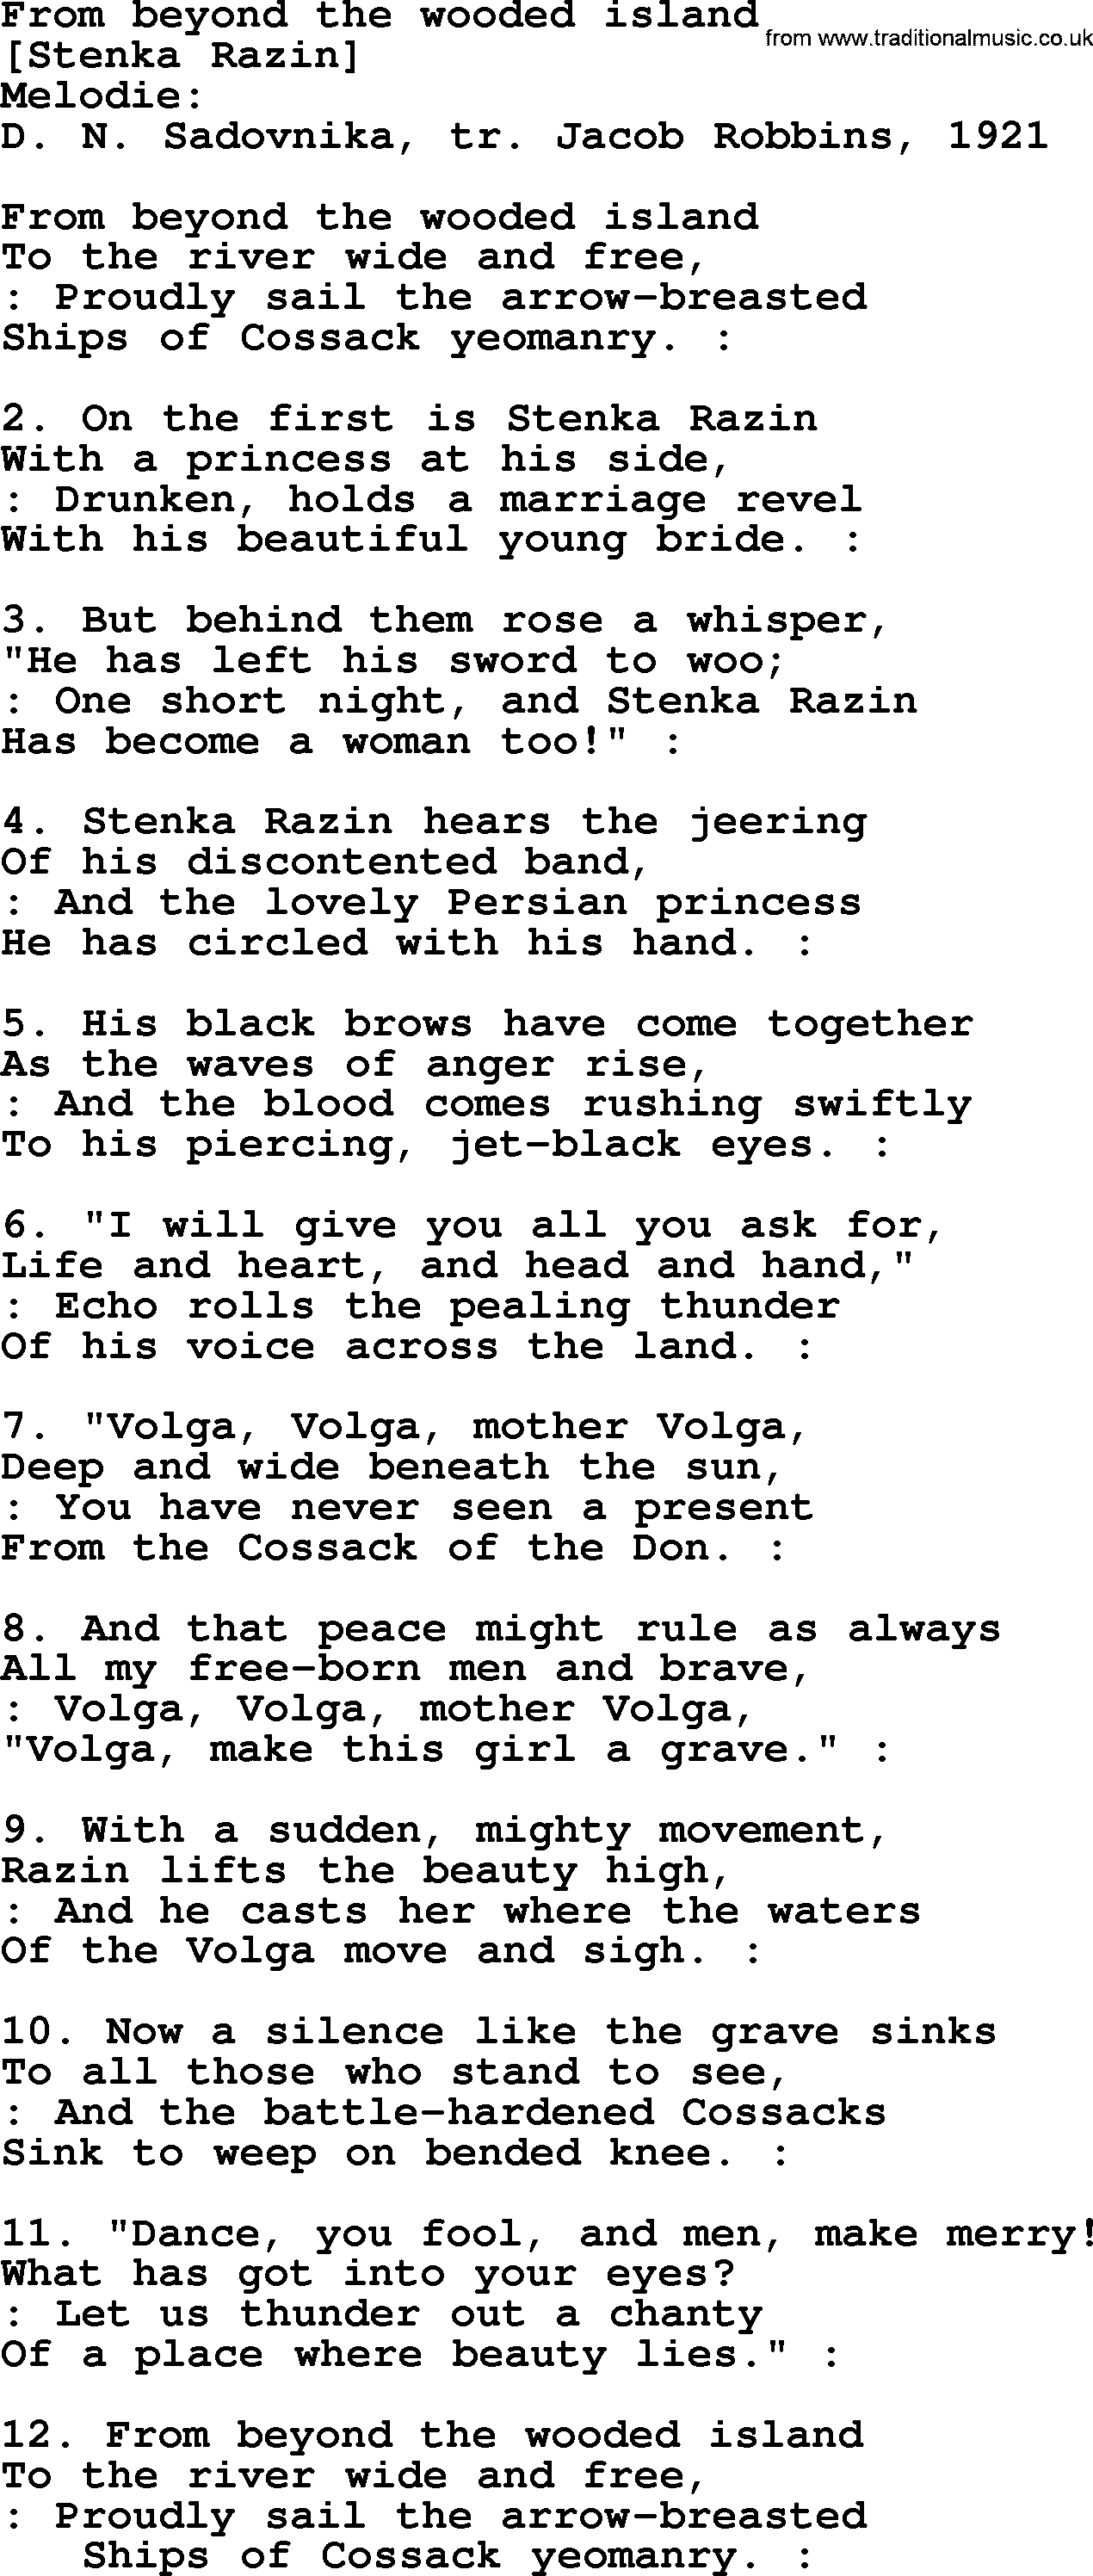 Old American Song: From Beyond The Wooded Island, lyrics